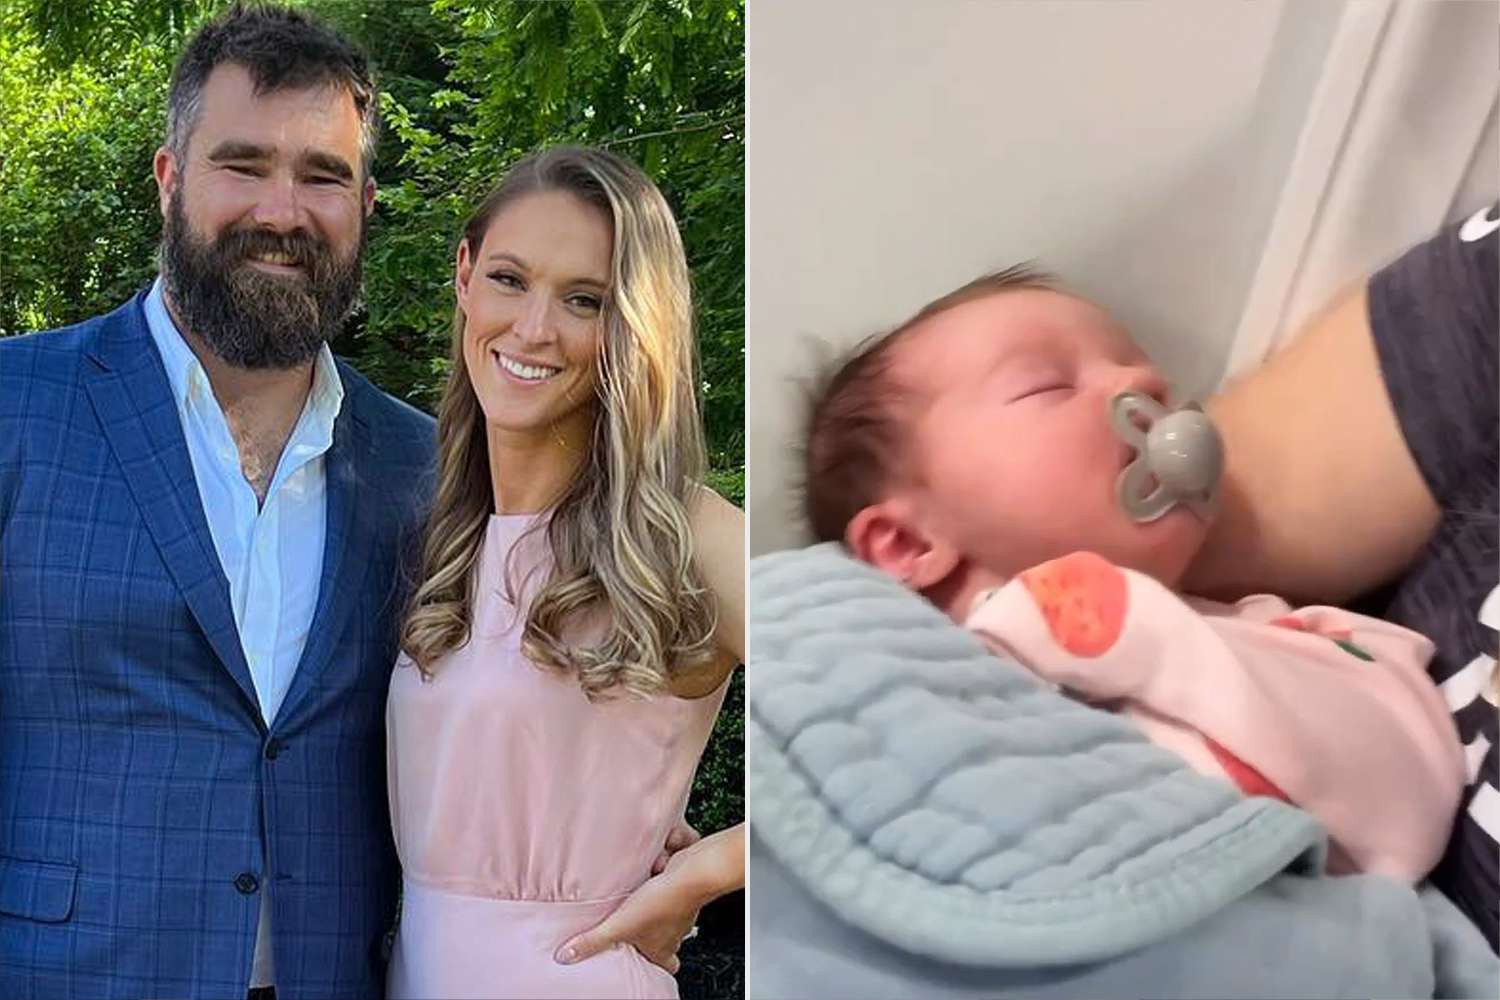 Jason Kelce's adoring wife, Kylie, details her husband's reaction after cradling their firstborn son, saying, "I have never seen him with such a broad smile."